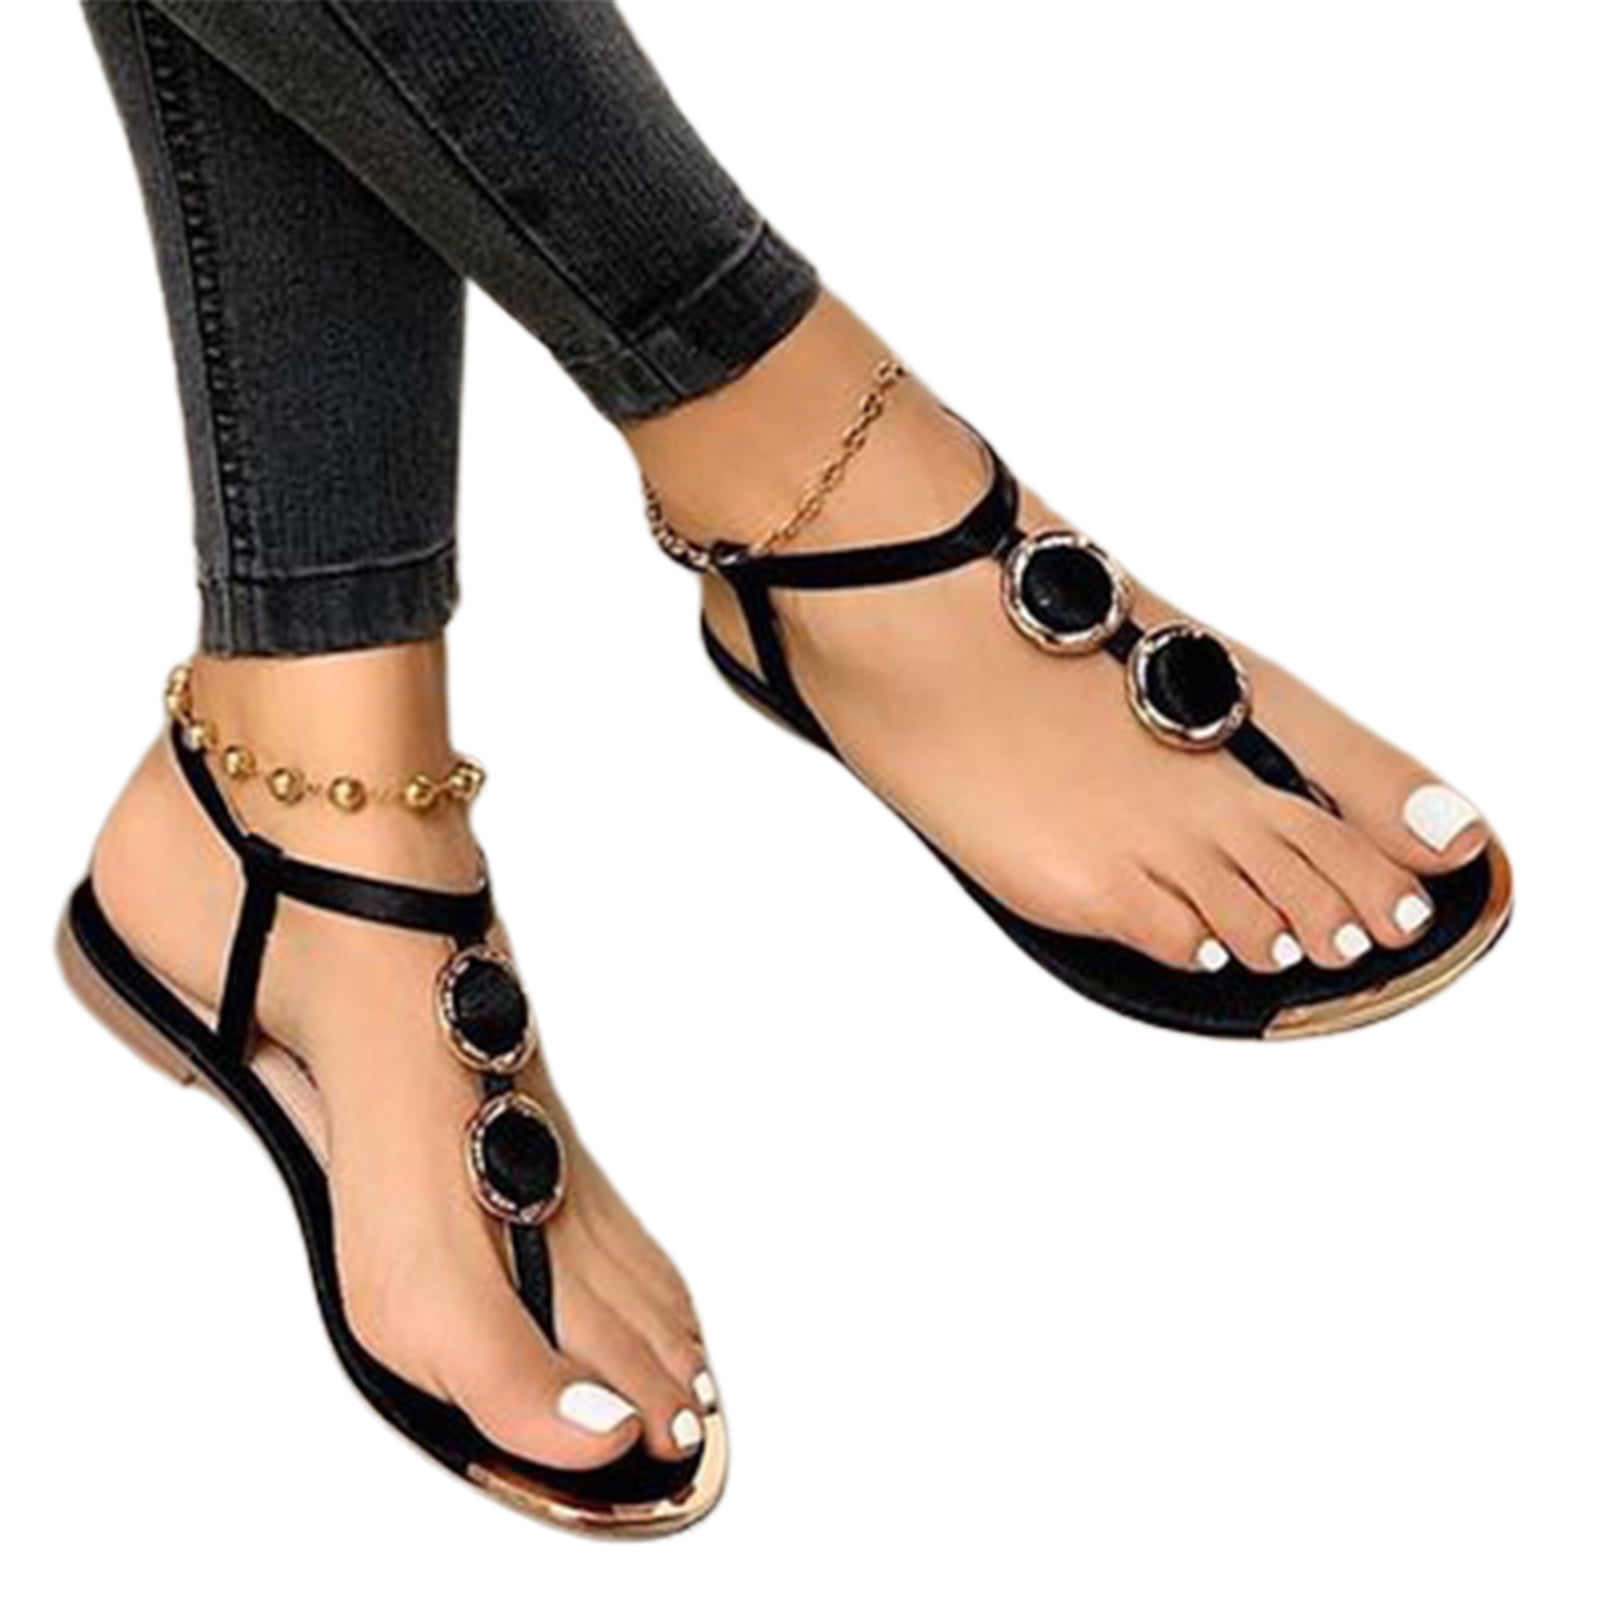 Details about   Women's Ballet Flats Sandals With Adjustable Ankle Strap Brand New 